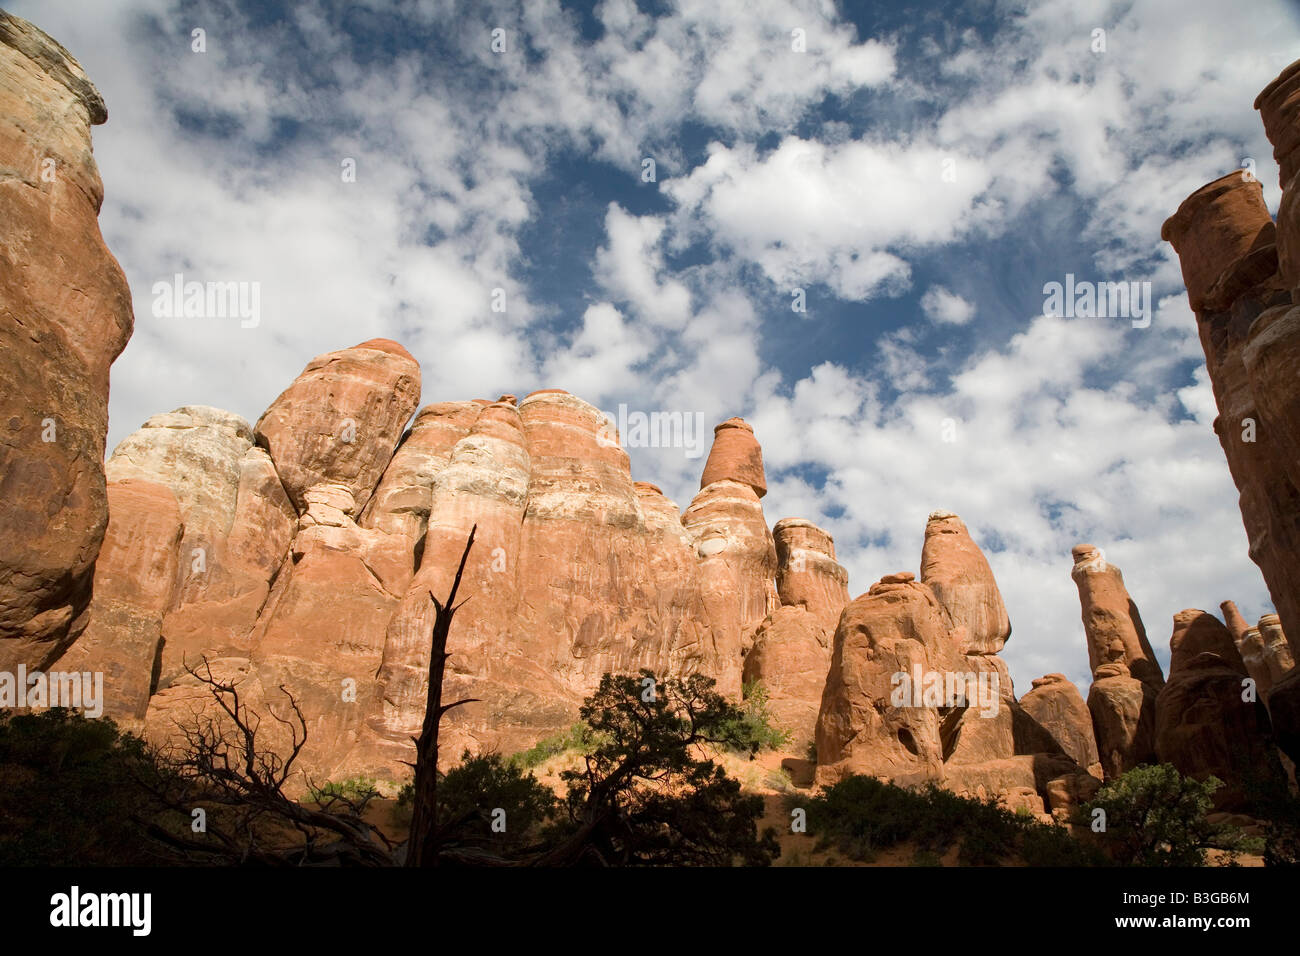 Moab Utah The maze like Fiery Furnace section of Arches National Park Stock Photo